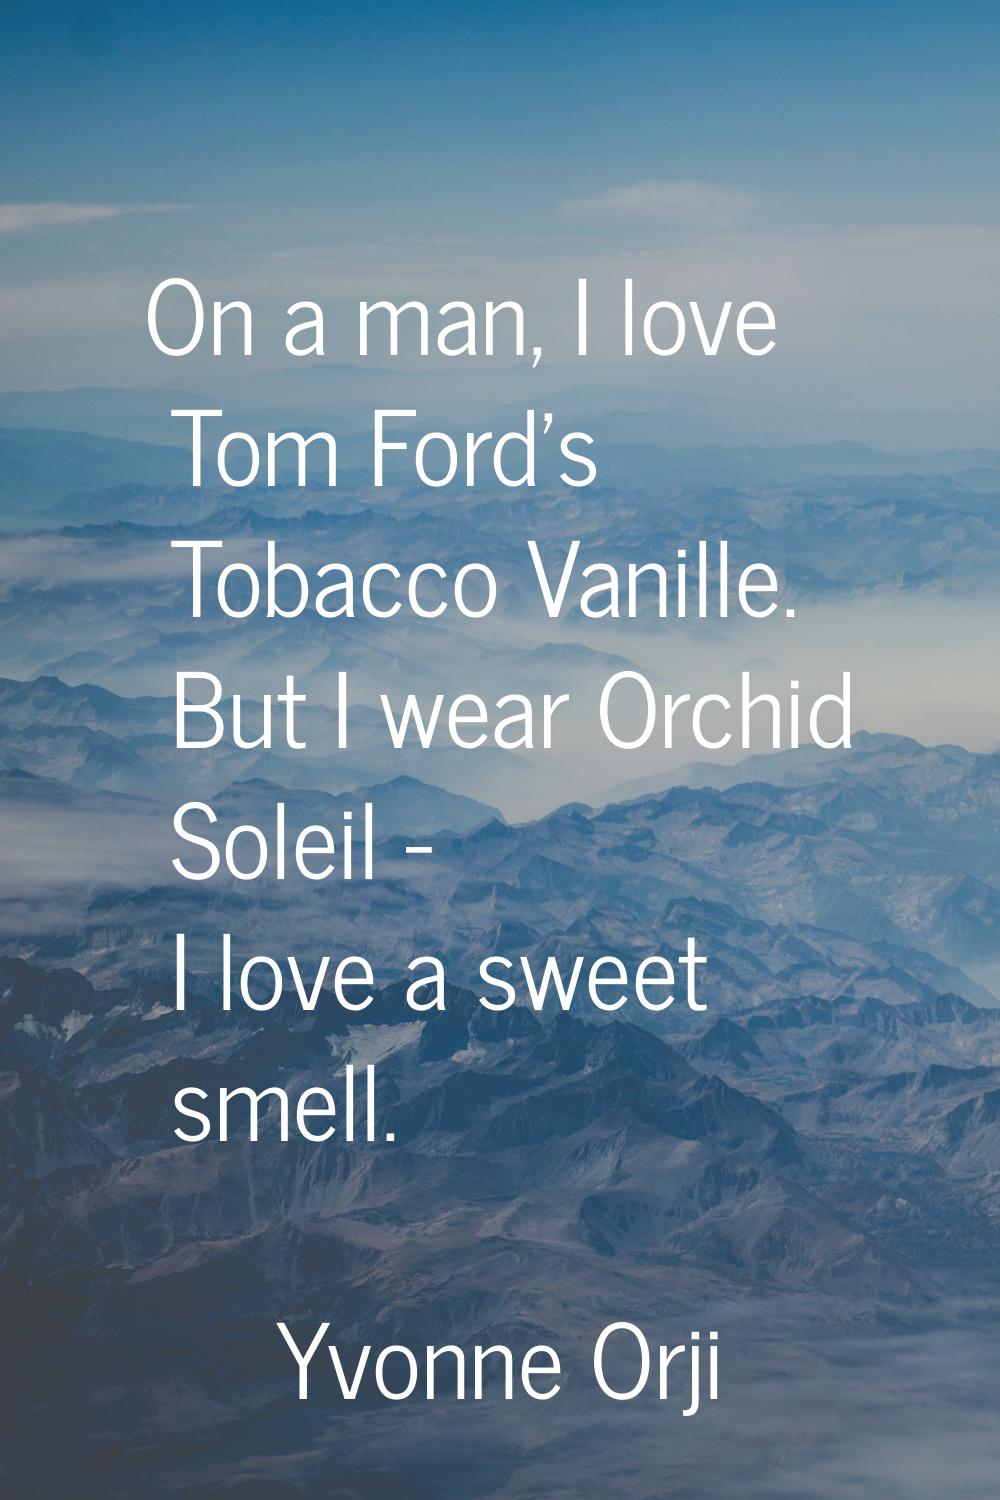 On a man, I love Tom Ford's Tobacco Vanille. But I wear Orchid Soleil - I love a sweet smell.